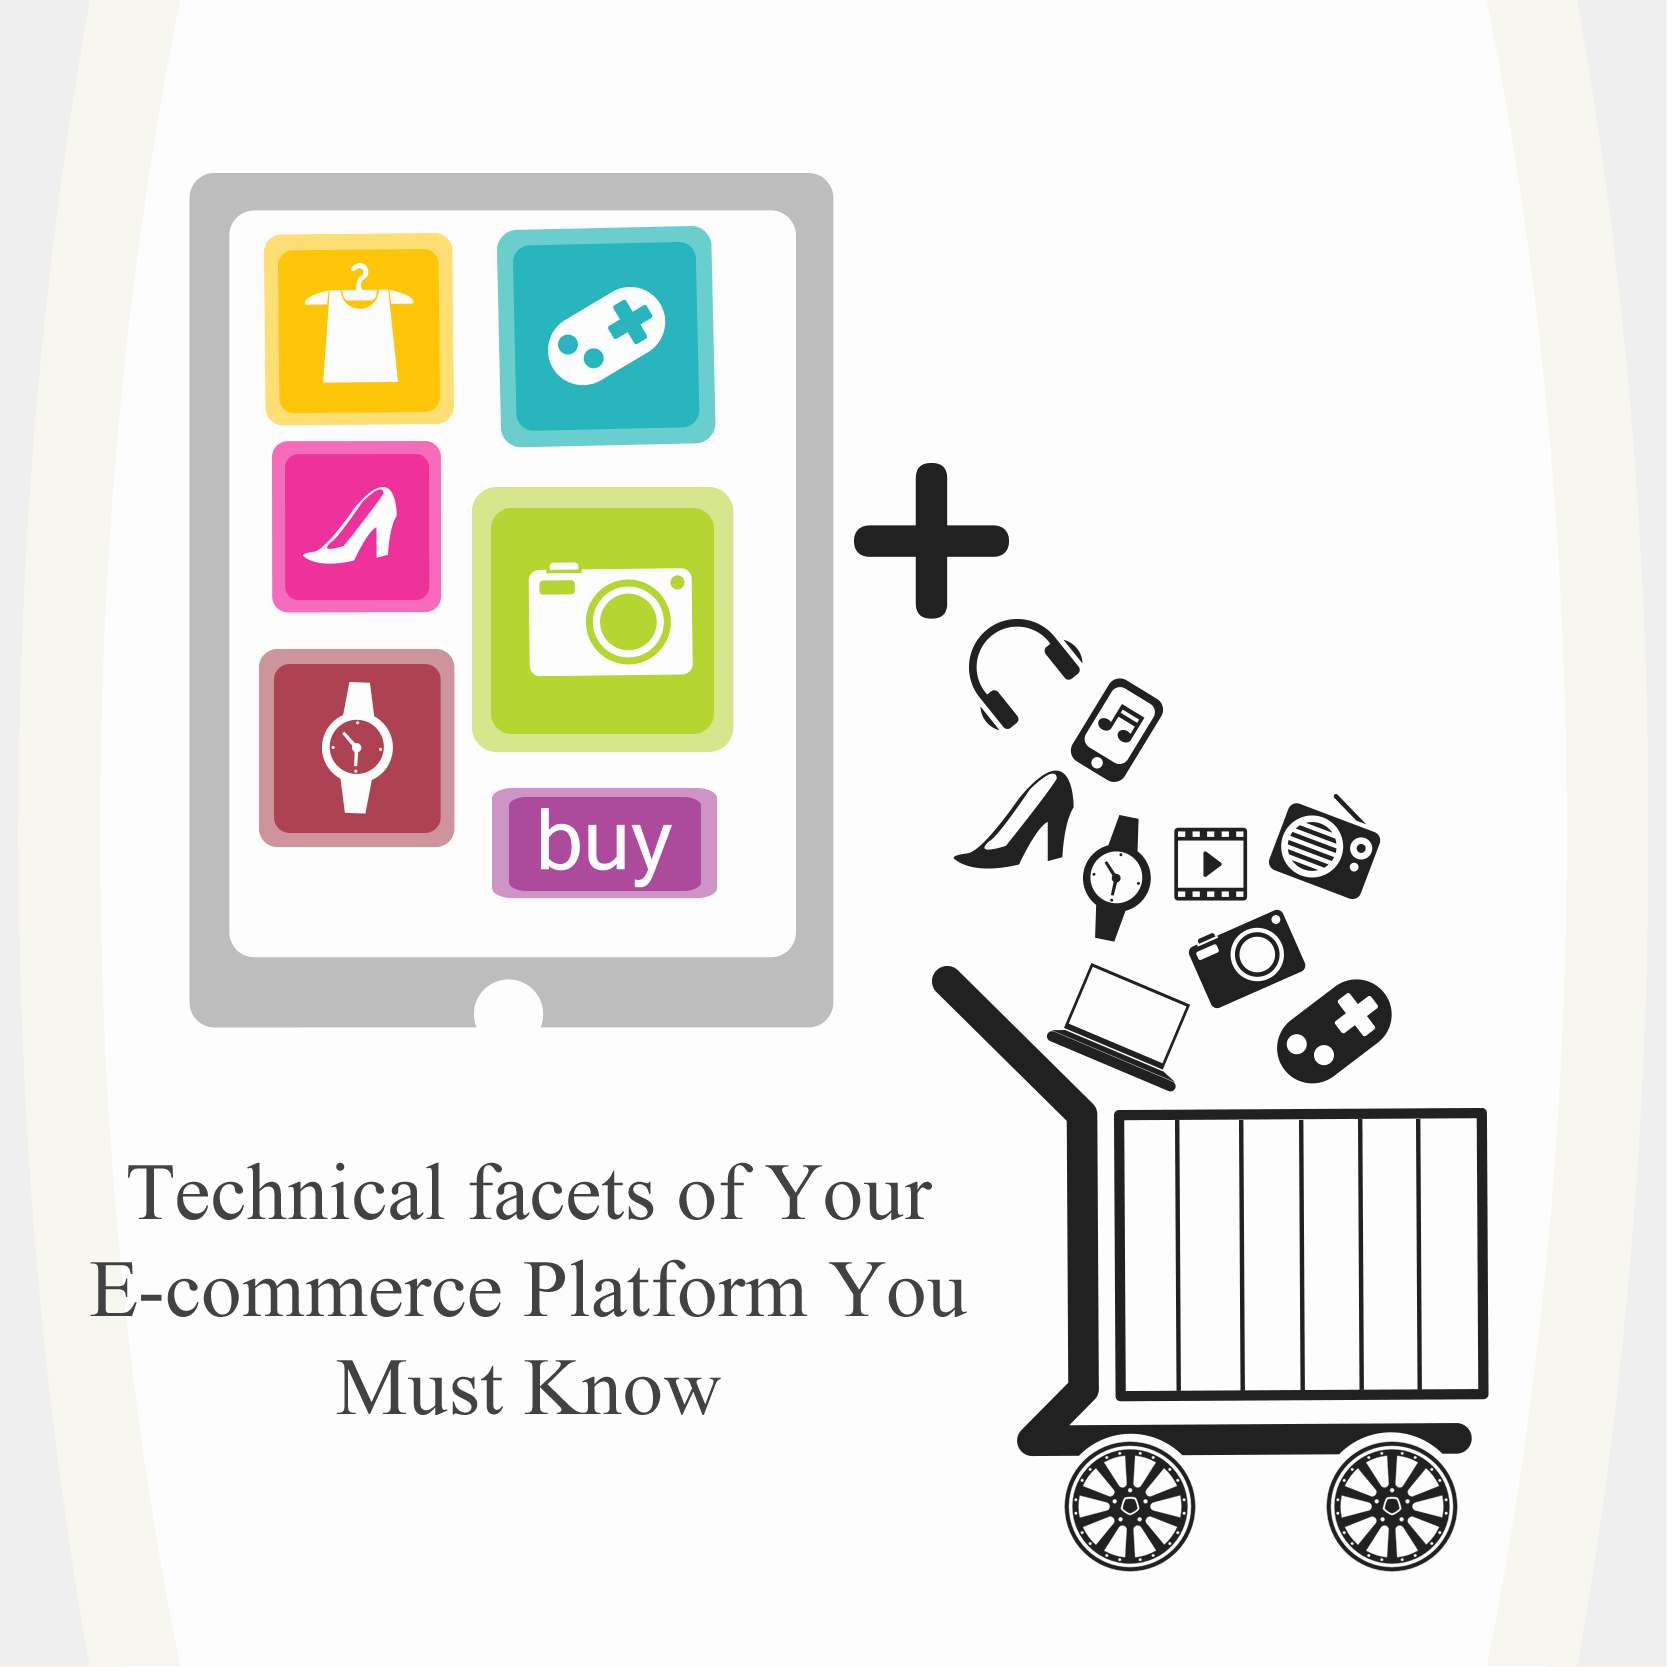 Technical facets of Your E-commerce Platform You Must Know - Image 1